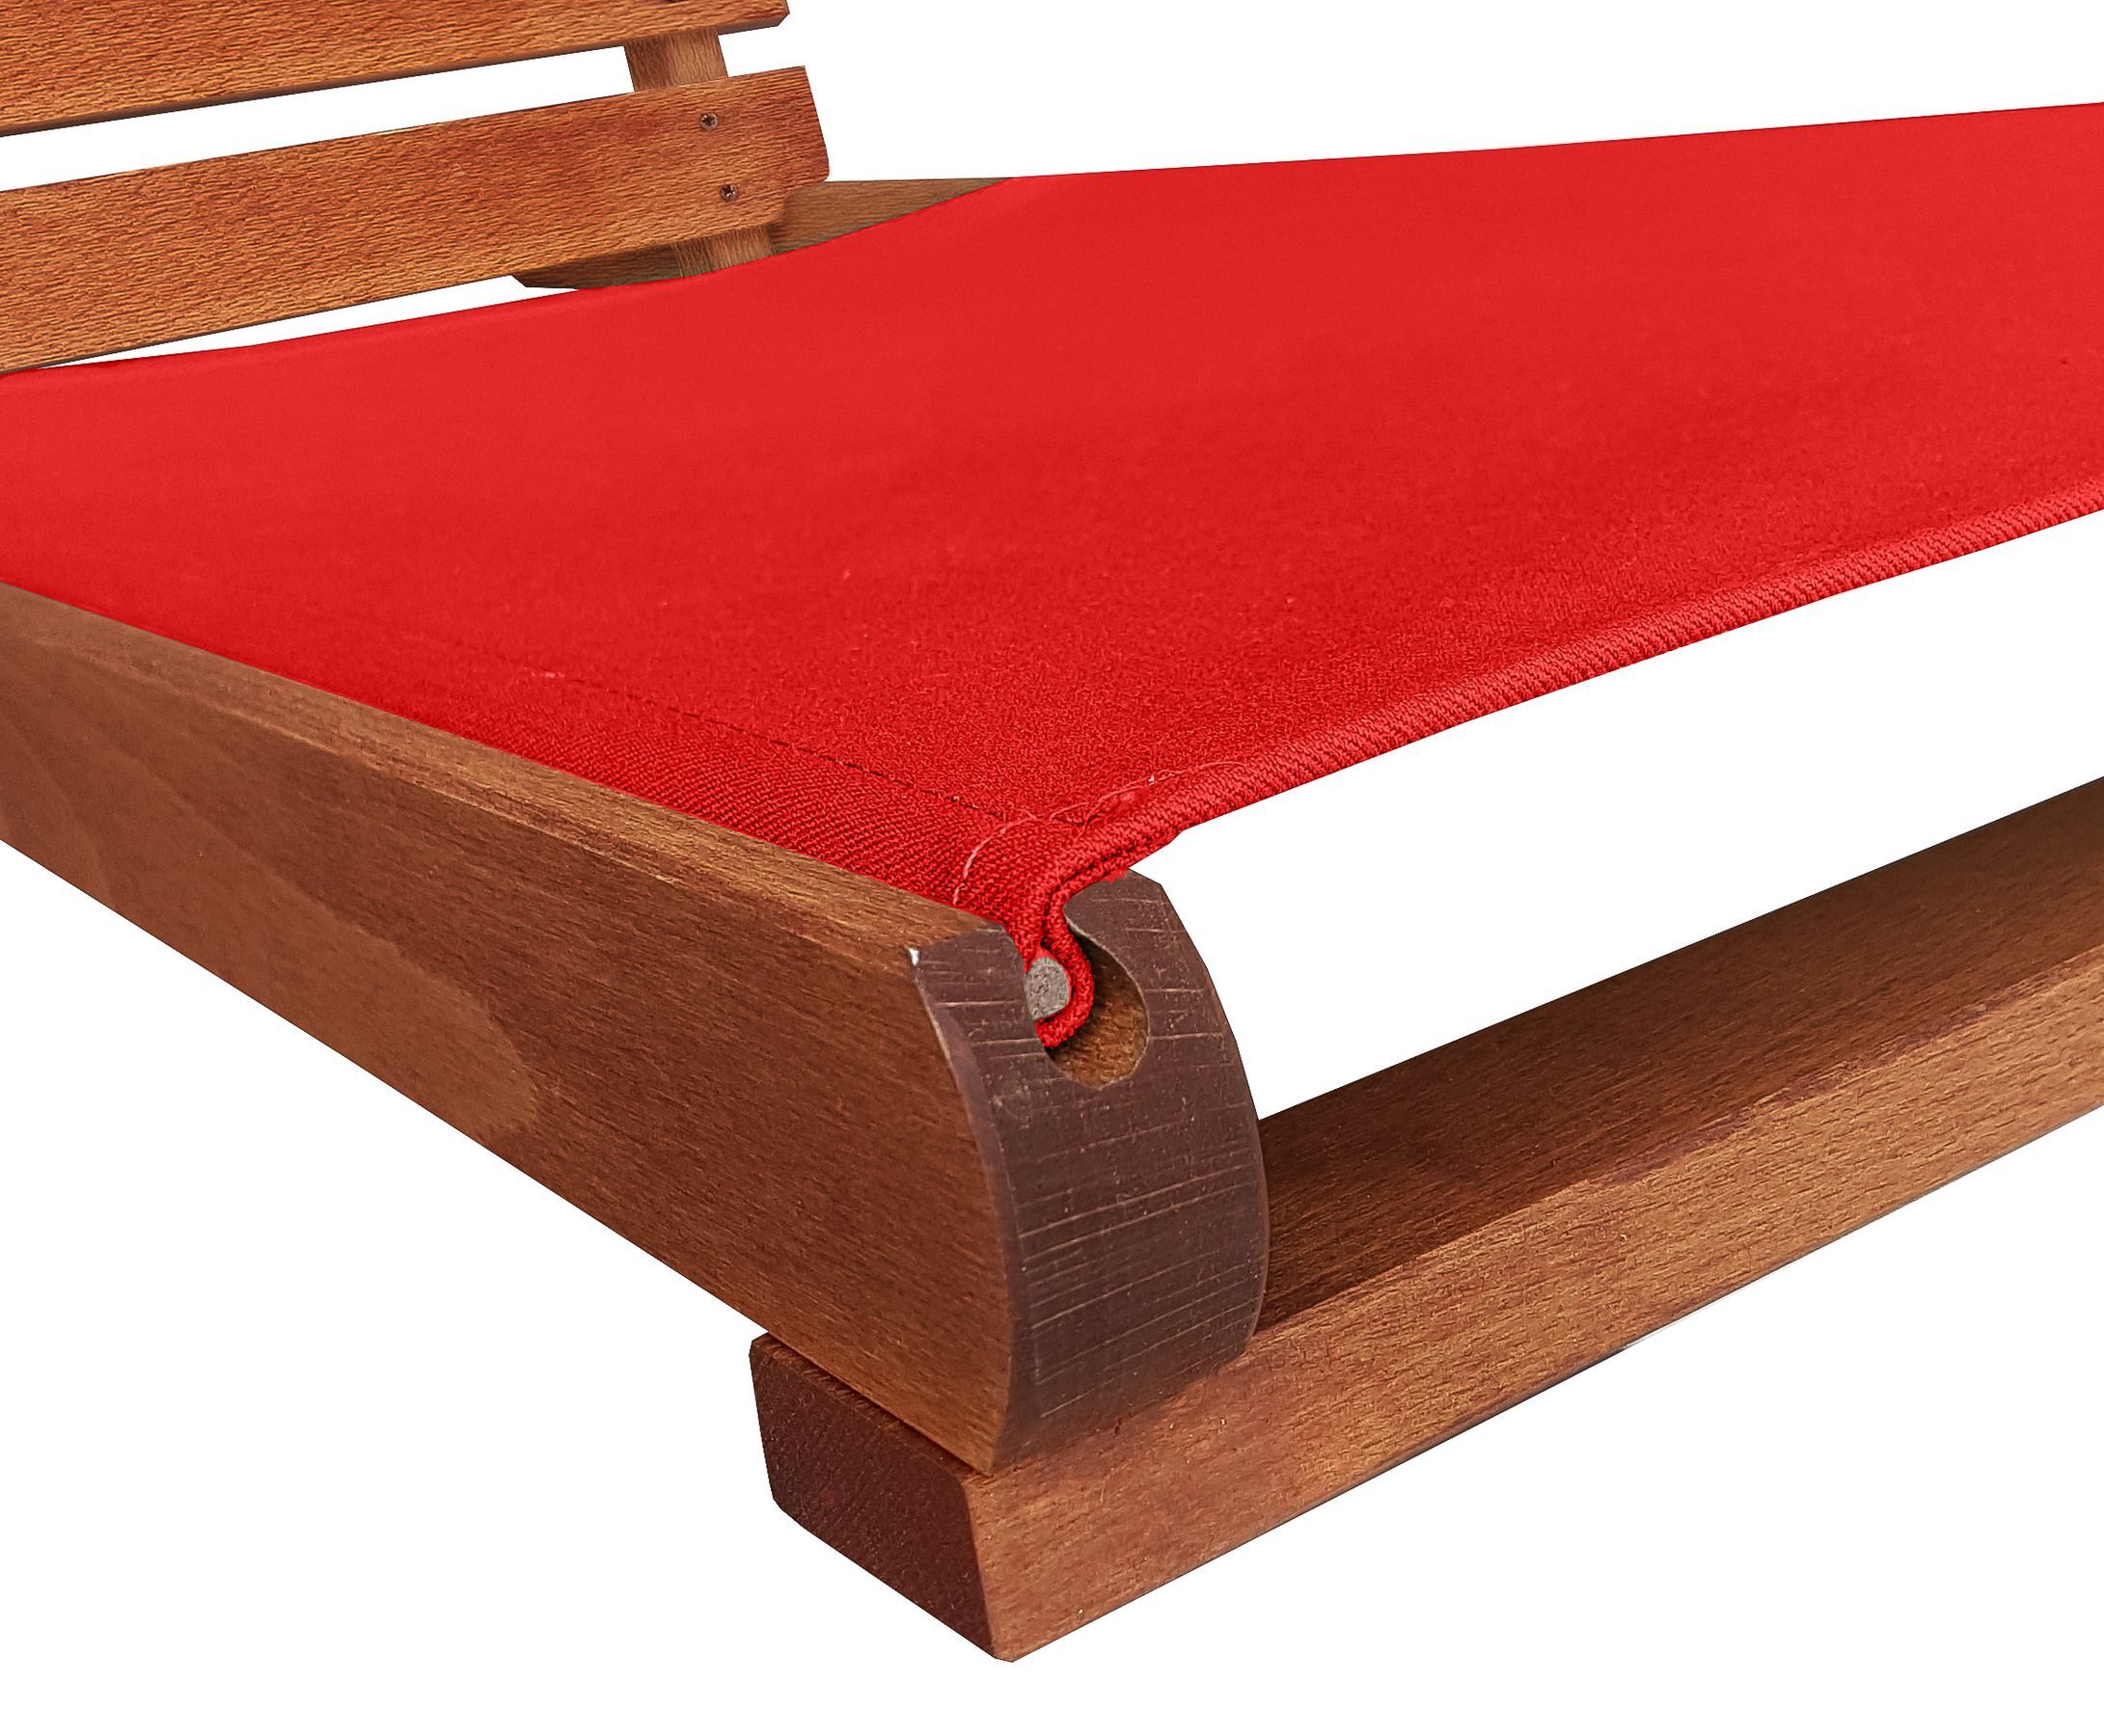 Roter Stoff mit dunklem Buche-Holz